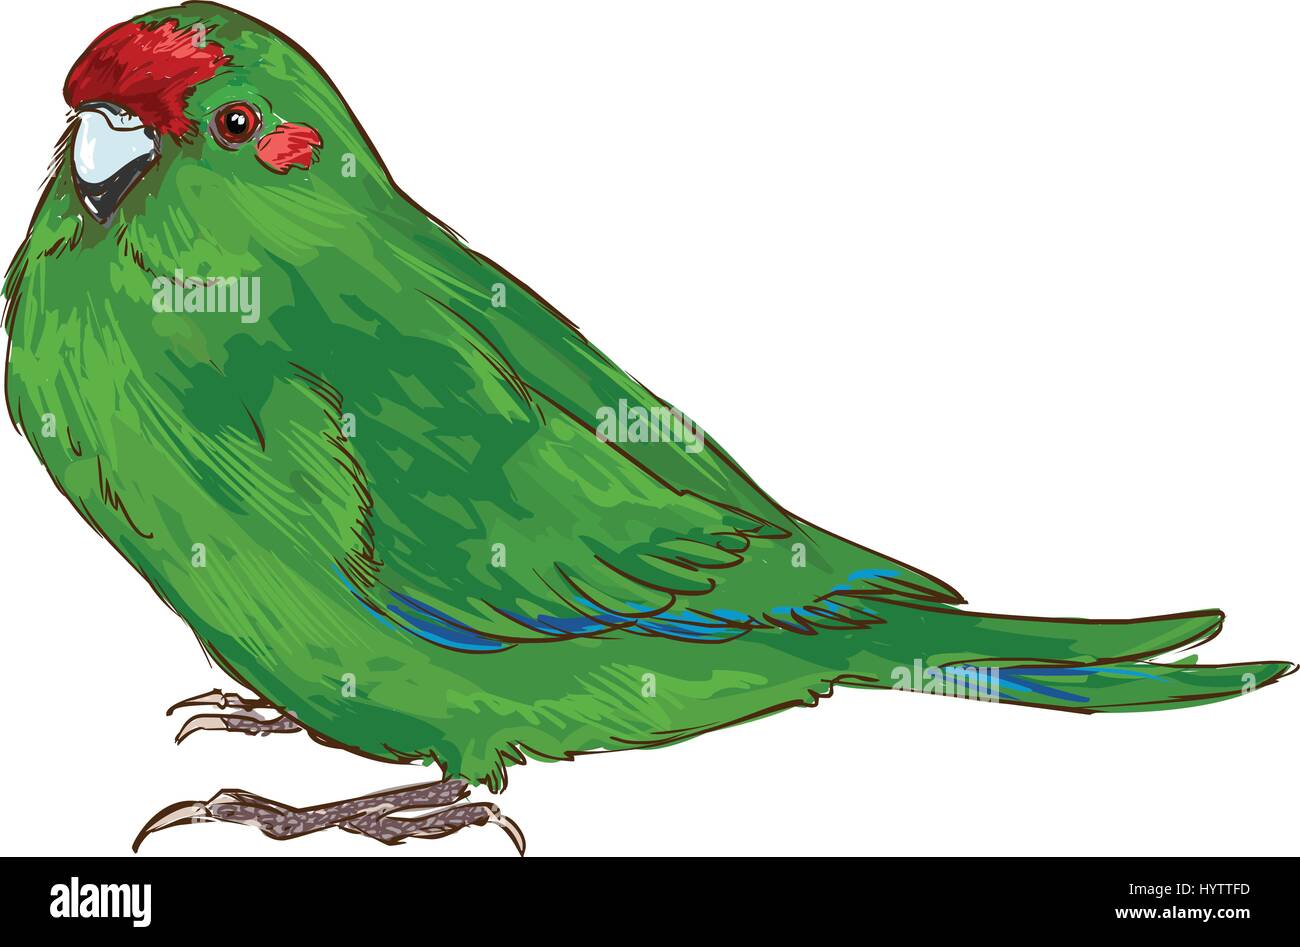 white background  vector illustration of a green parrot Stock Vector